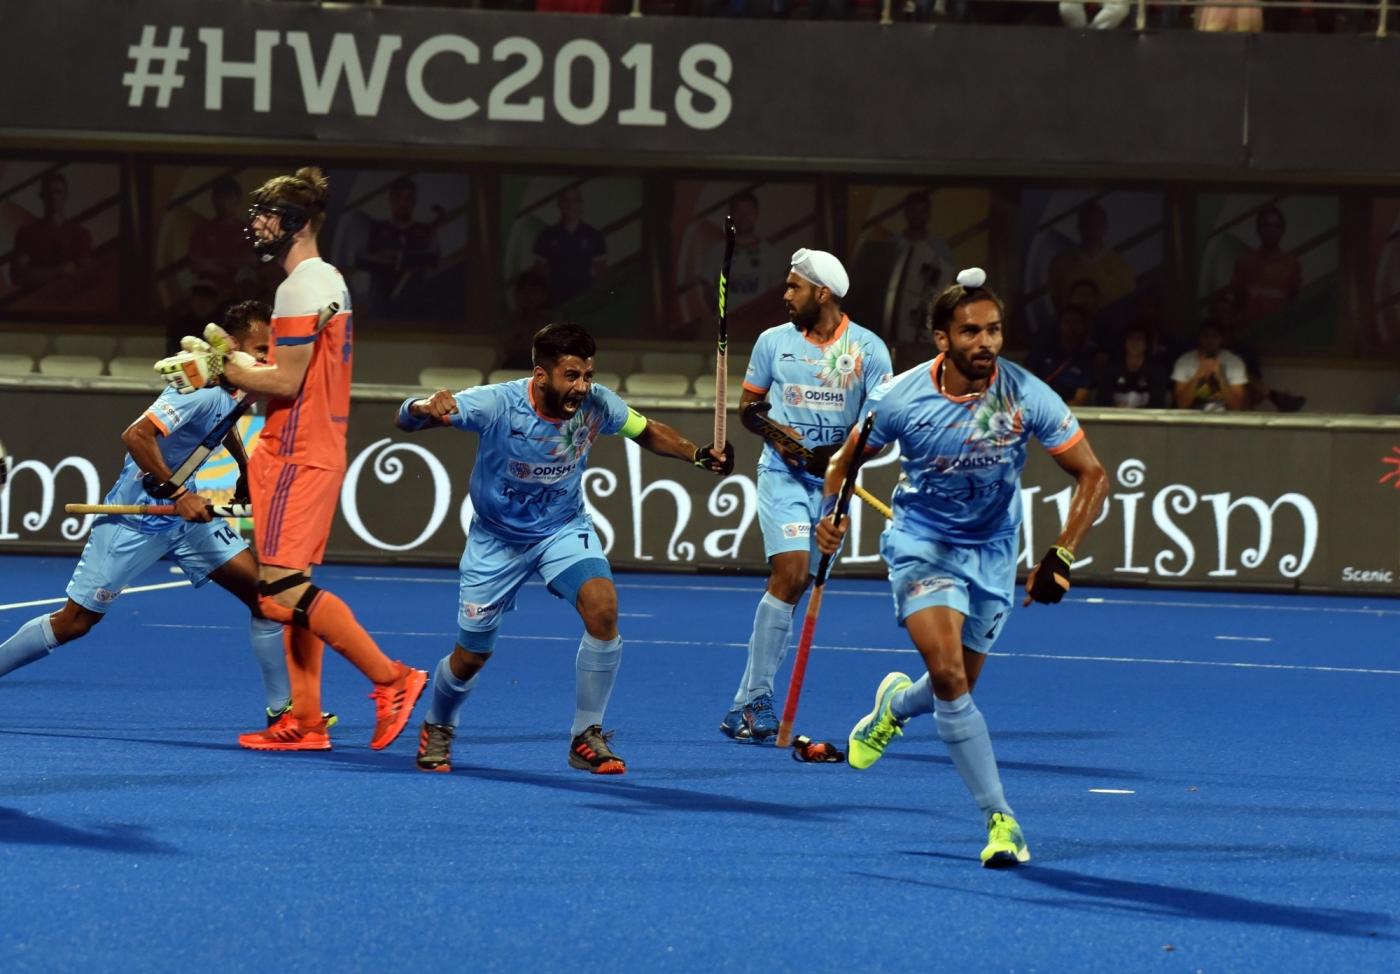 Bhubaneswar: Players in action during a Men's Hockey World Cup 2018 match between India and Netherlands at Kalinga Stadium in Bhubaneswar on Dec 12, 2018. (Photo: IANS) by .